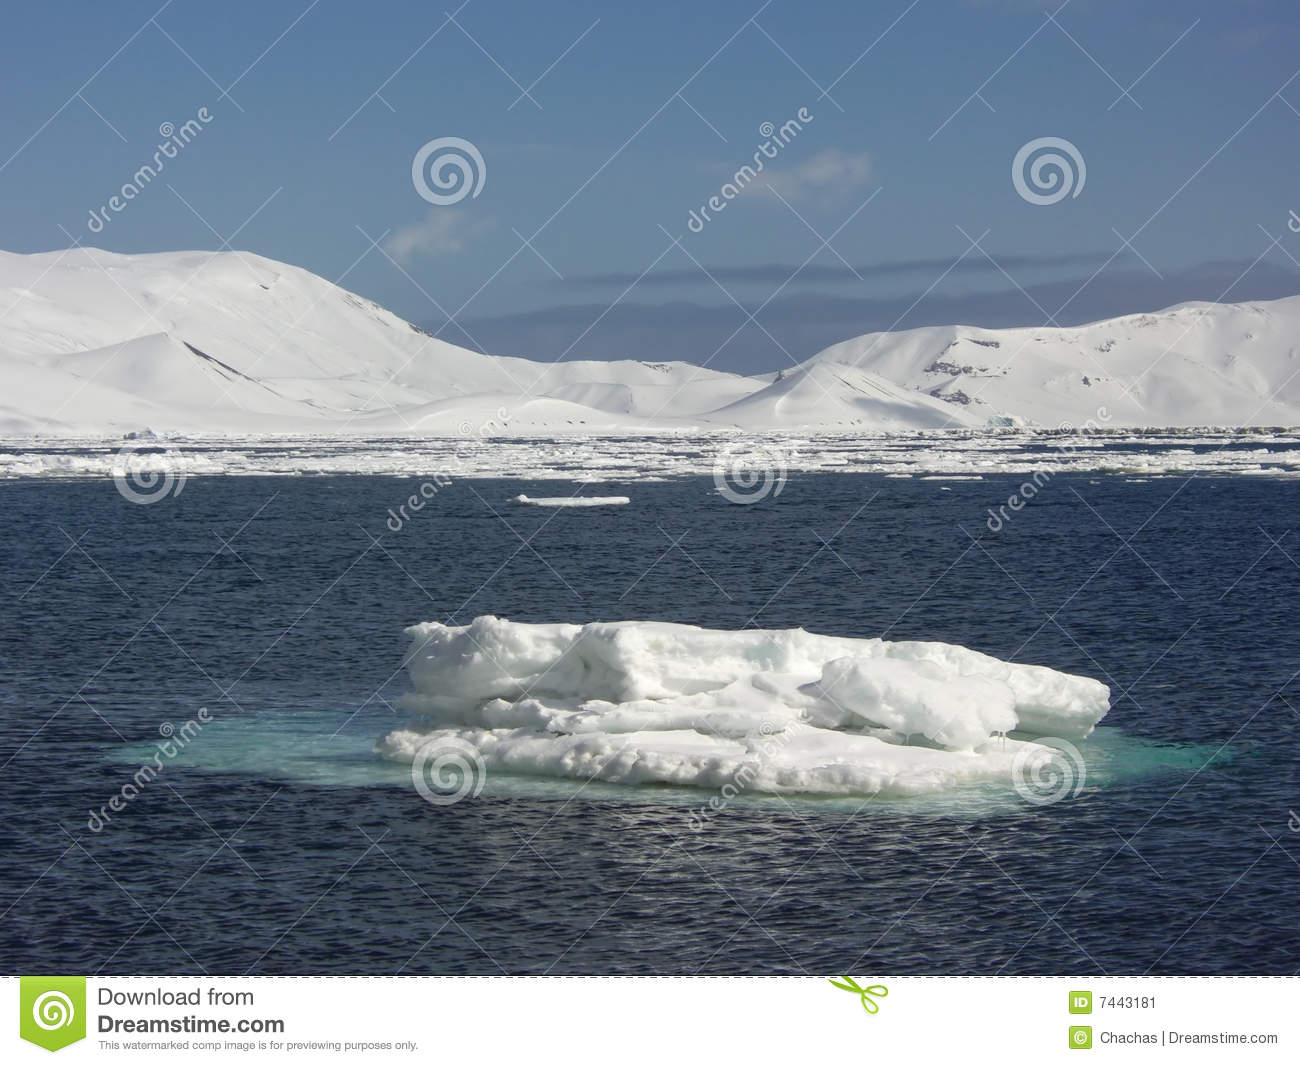 View Of A Small Iceberg Or Chunk Of Floating Ice With Frozen